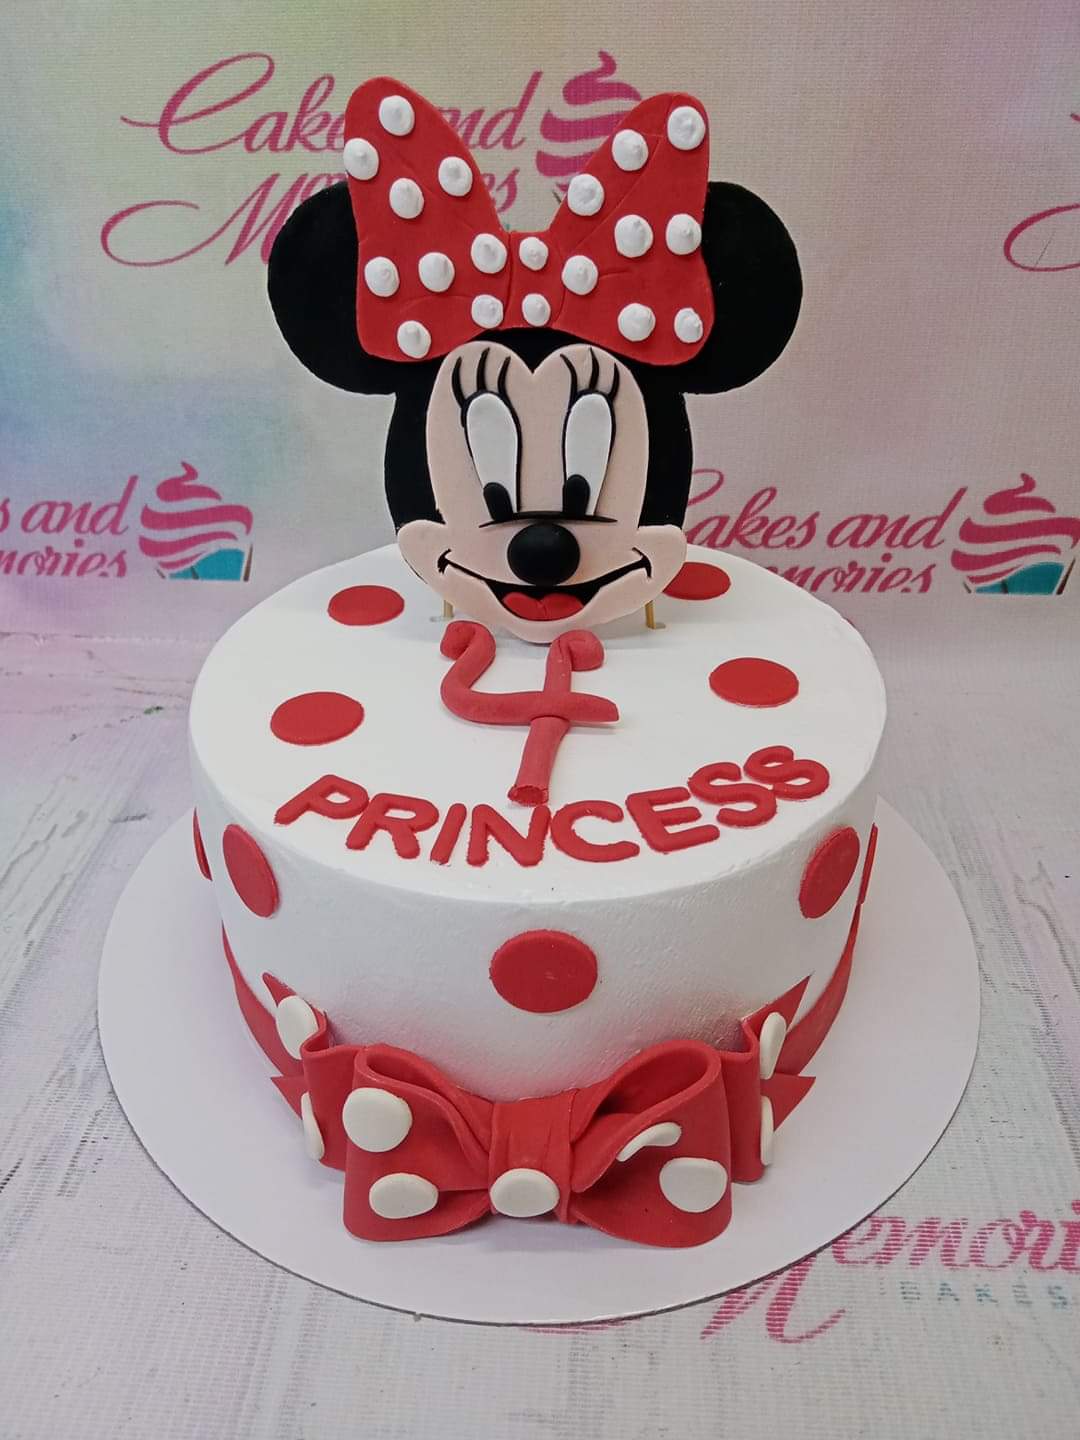 2087) 1st Birthday with Minnie Mouse - ABC Cake Shop & Bakery